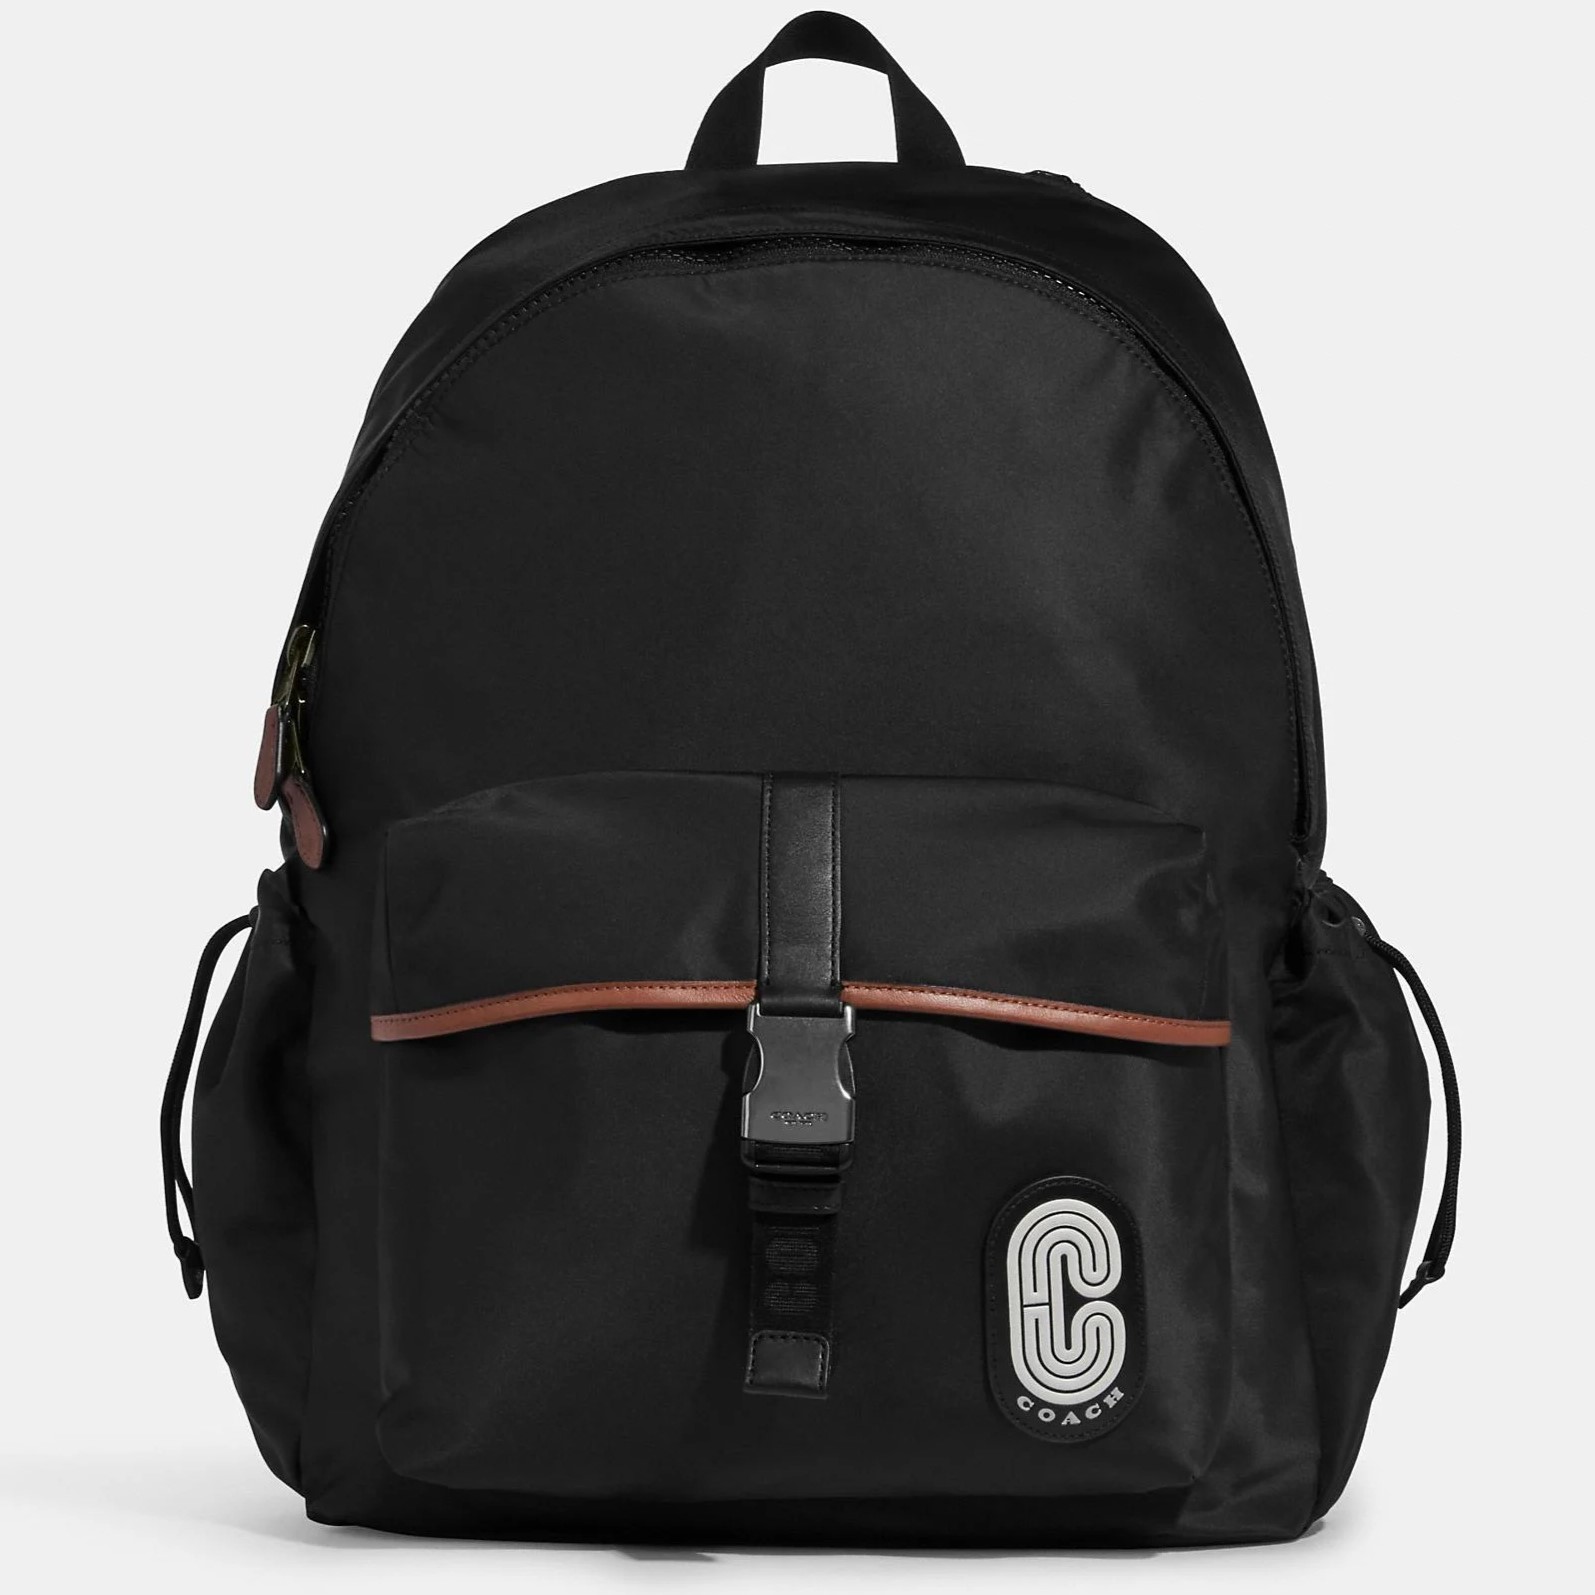 BALO ĐEN DU LỊCH COACH MAX BACKPACK NYLON TWILL AND NATURAL SMOOTH CALF LEATHER GUNMETAL BLACK C9834 3